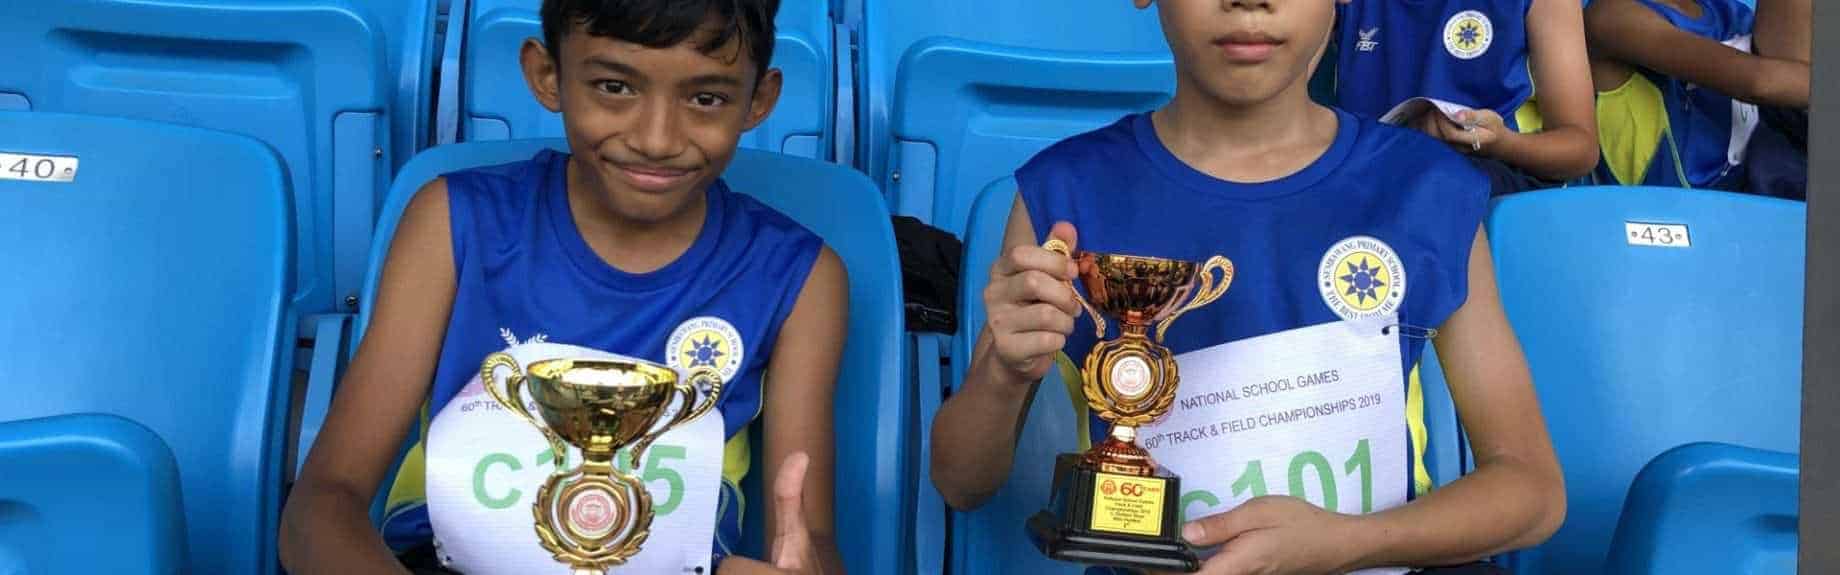 Sembawang Primary School in NATIONAL SCHOOL GAMES SPSSC 60th Track and Field Championships 2019